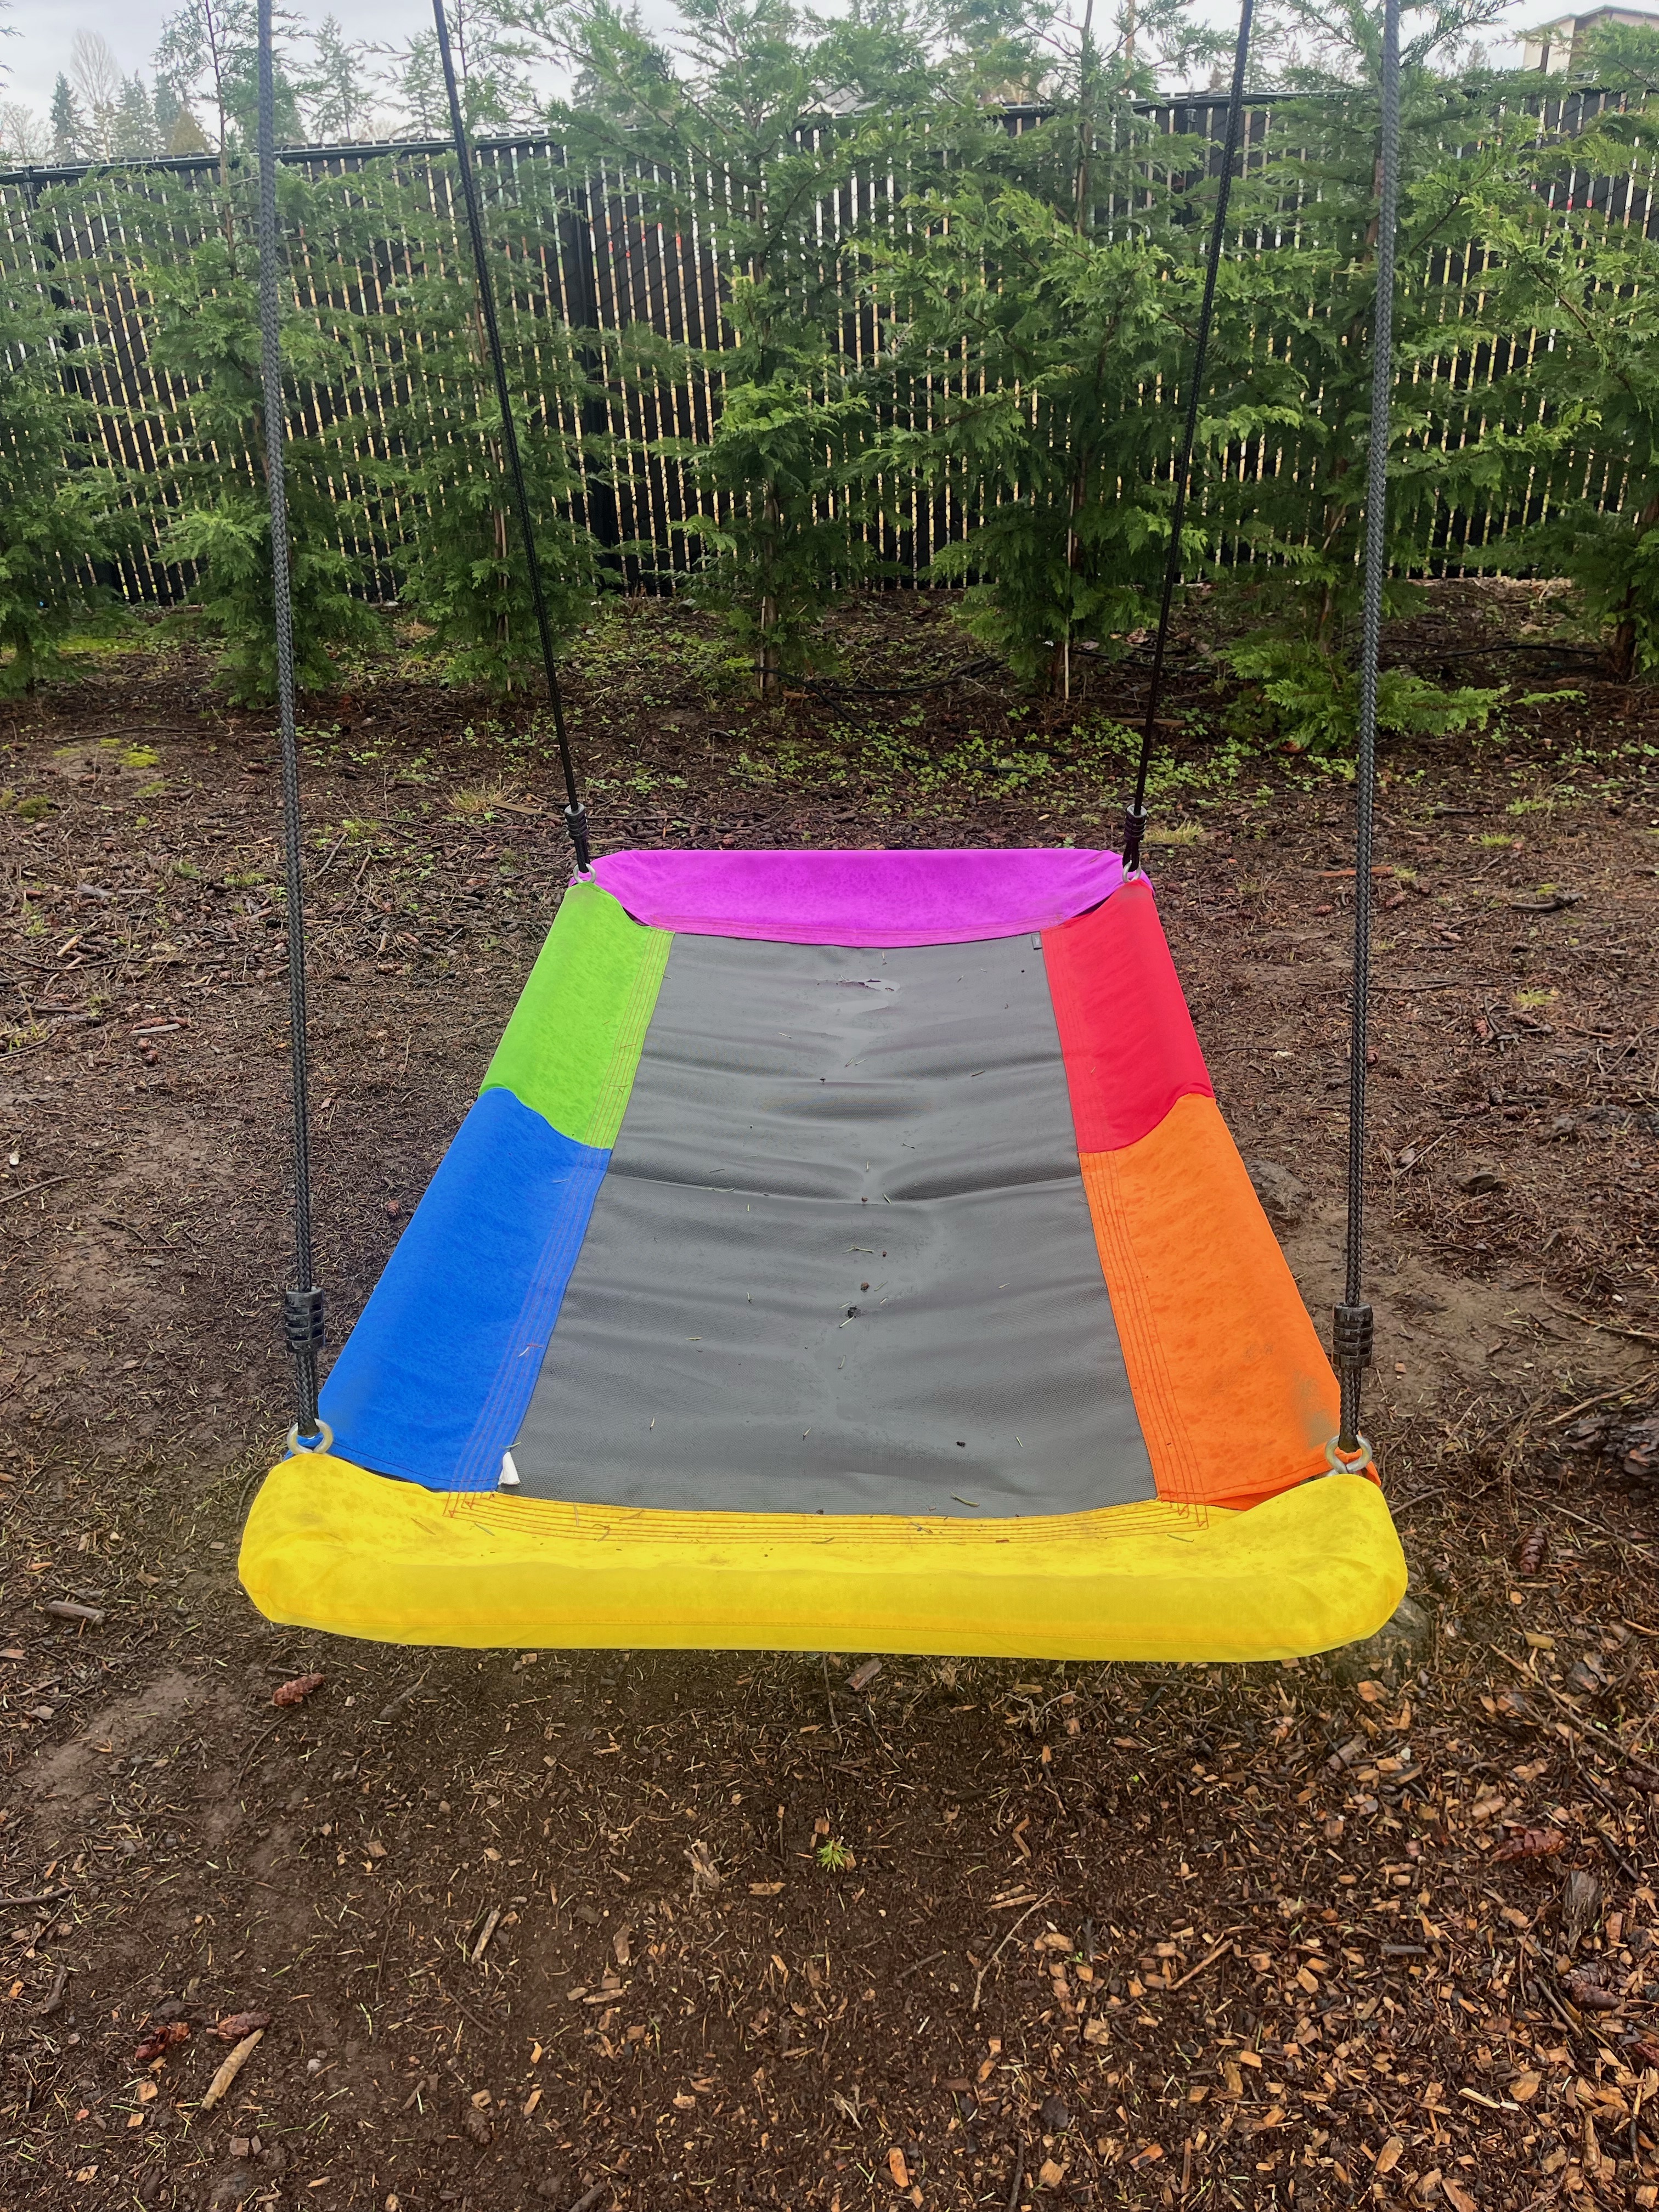 Trebussy platform tree swing with rainbow colored edges hanging in yard